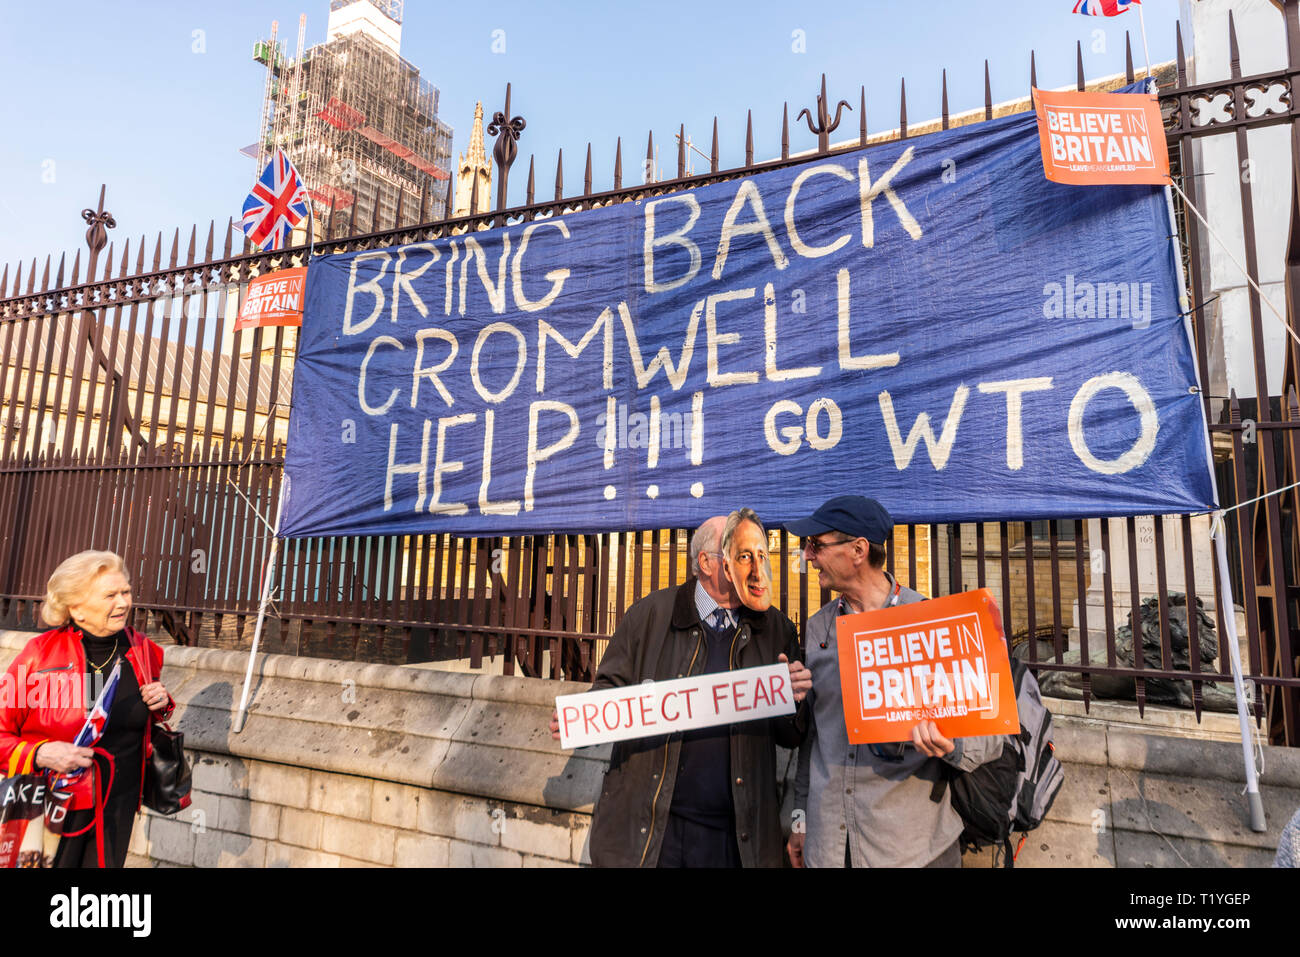 Westminster, London, UK. Demonstrations are taking place by Brexiteers protesting against the UK government's inability to follow through with leaving the European Union despite the referendum result. On the day that a Brexit motion is due to take place in Parliament large numbers of people have gathered outside to make their point heard. Bring back Oliver Cromwell banner. WTO Stock Photo